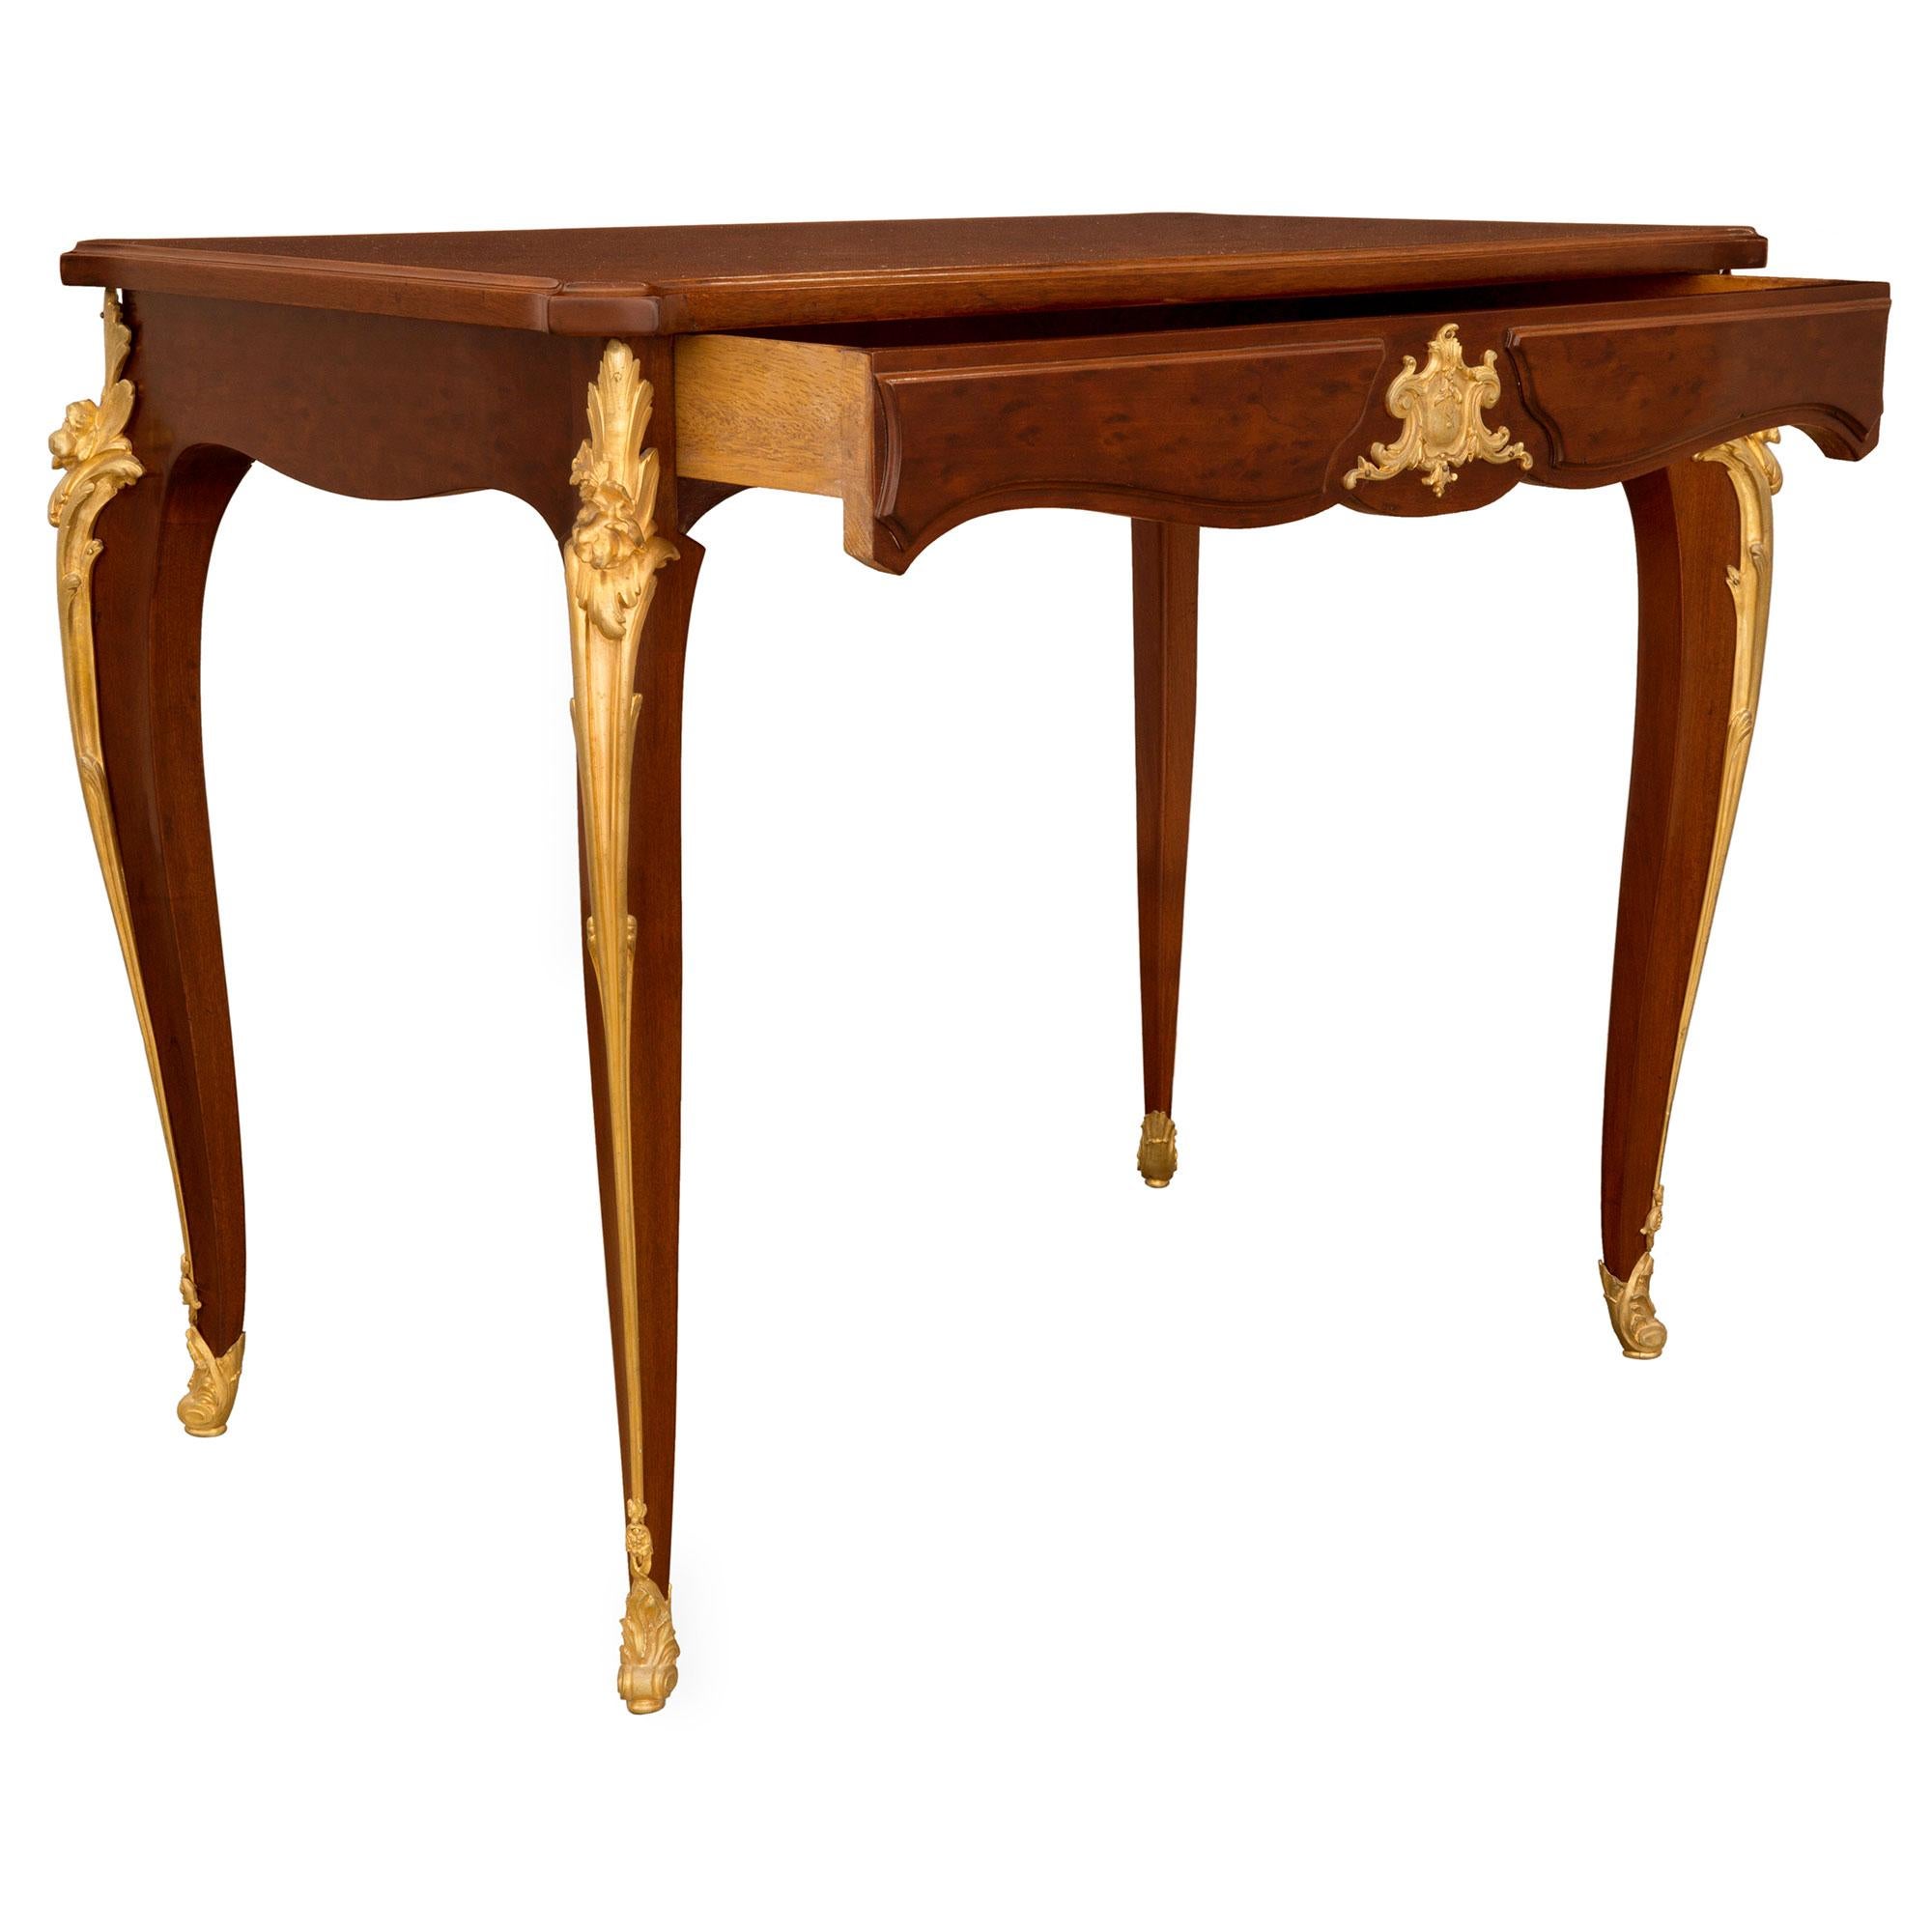 French 19th Century Louis XV Style Mahogany and Ormolu Center Table/Desk For Sale 1